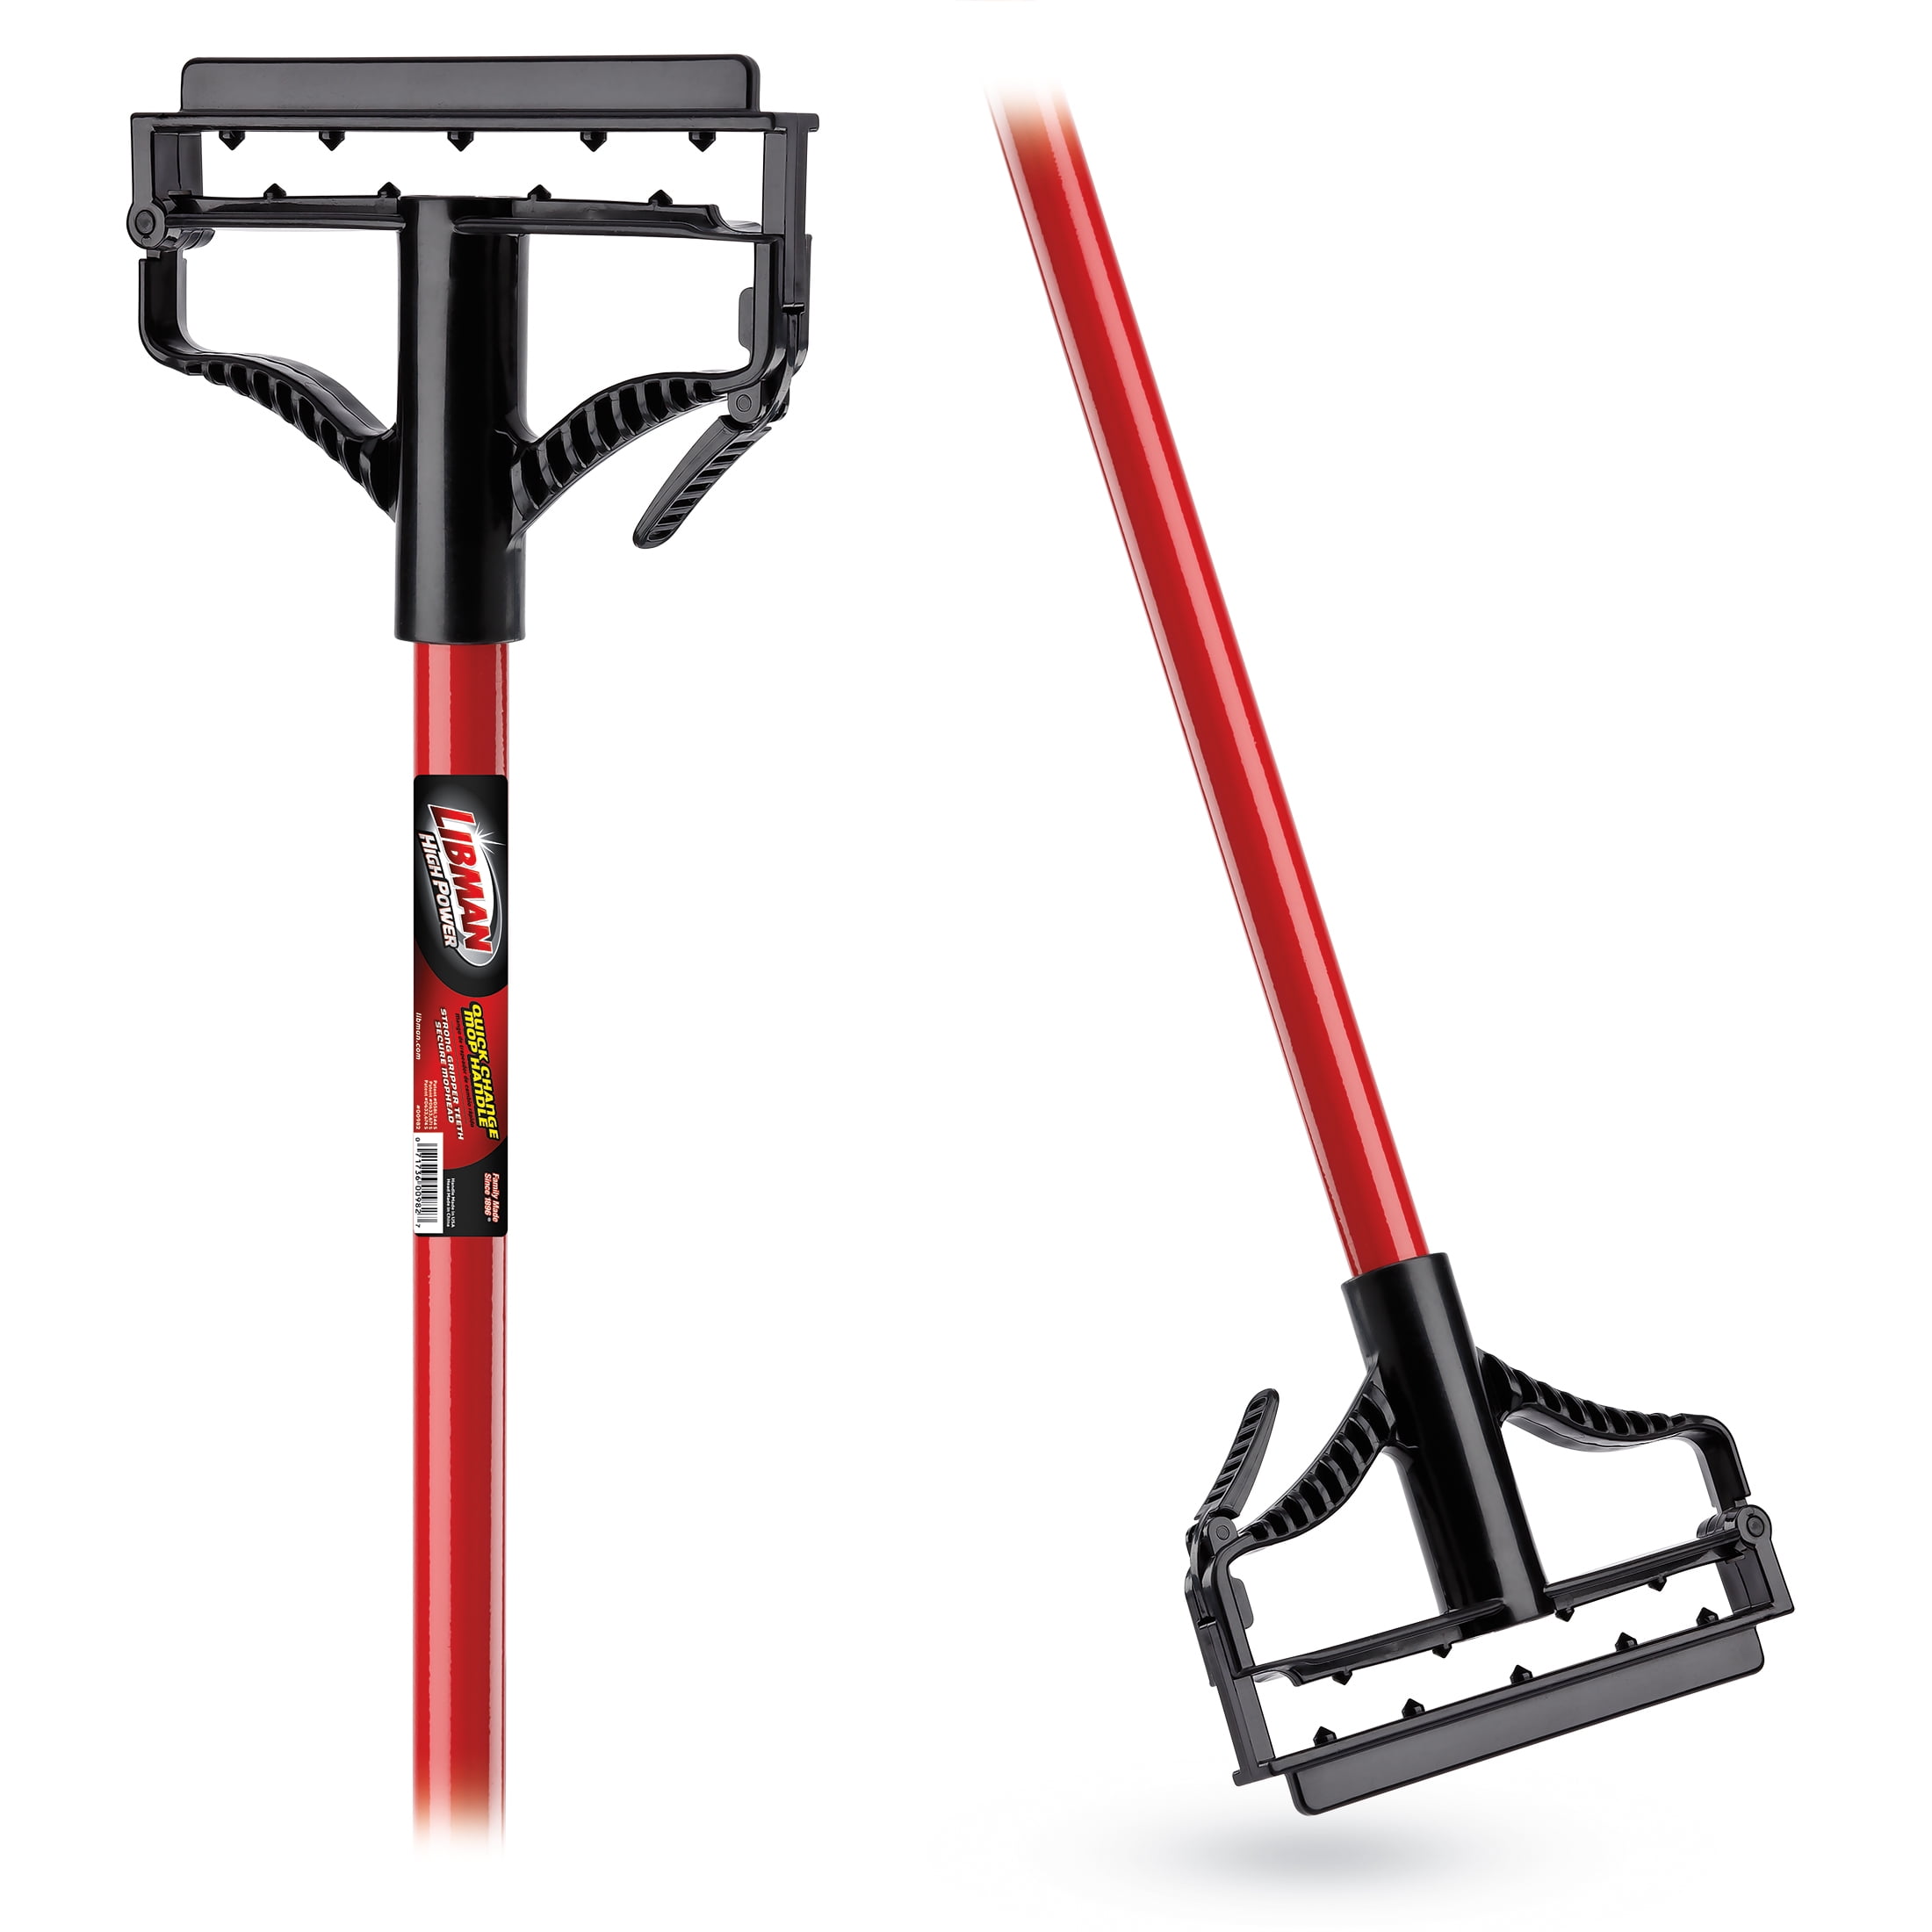 Get the newest Holcroft Long Handle Flat 2inch Red Brush 637 for less